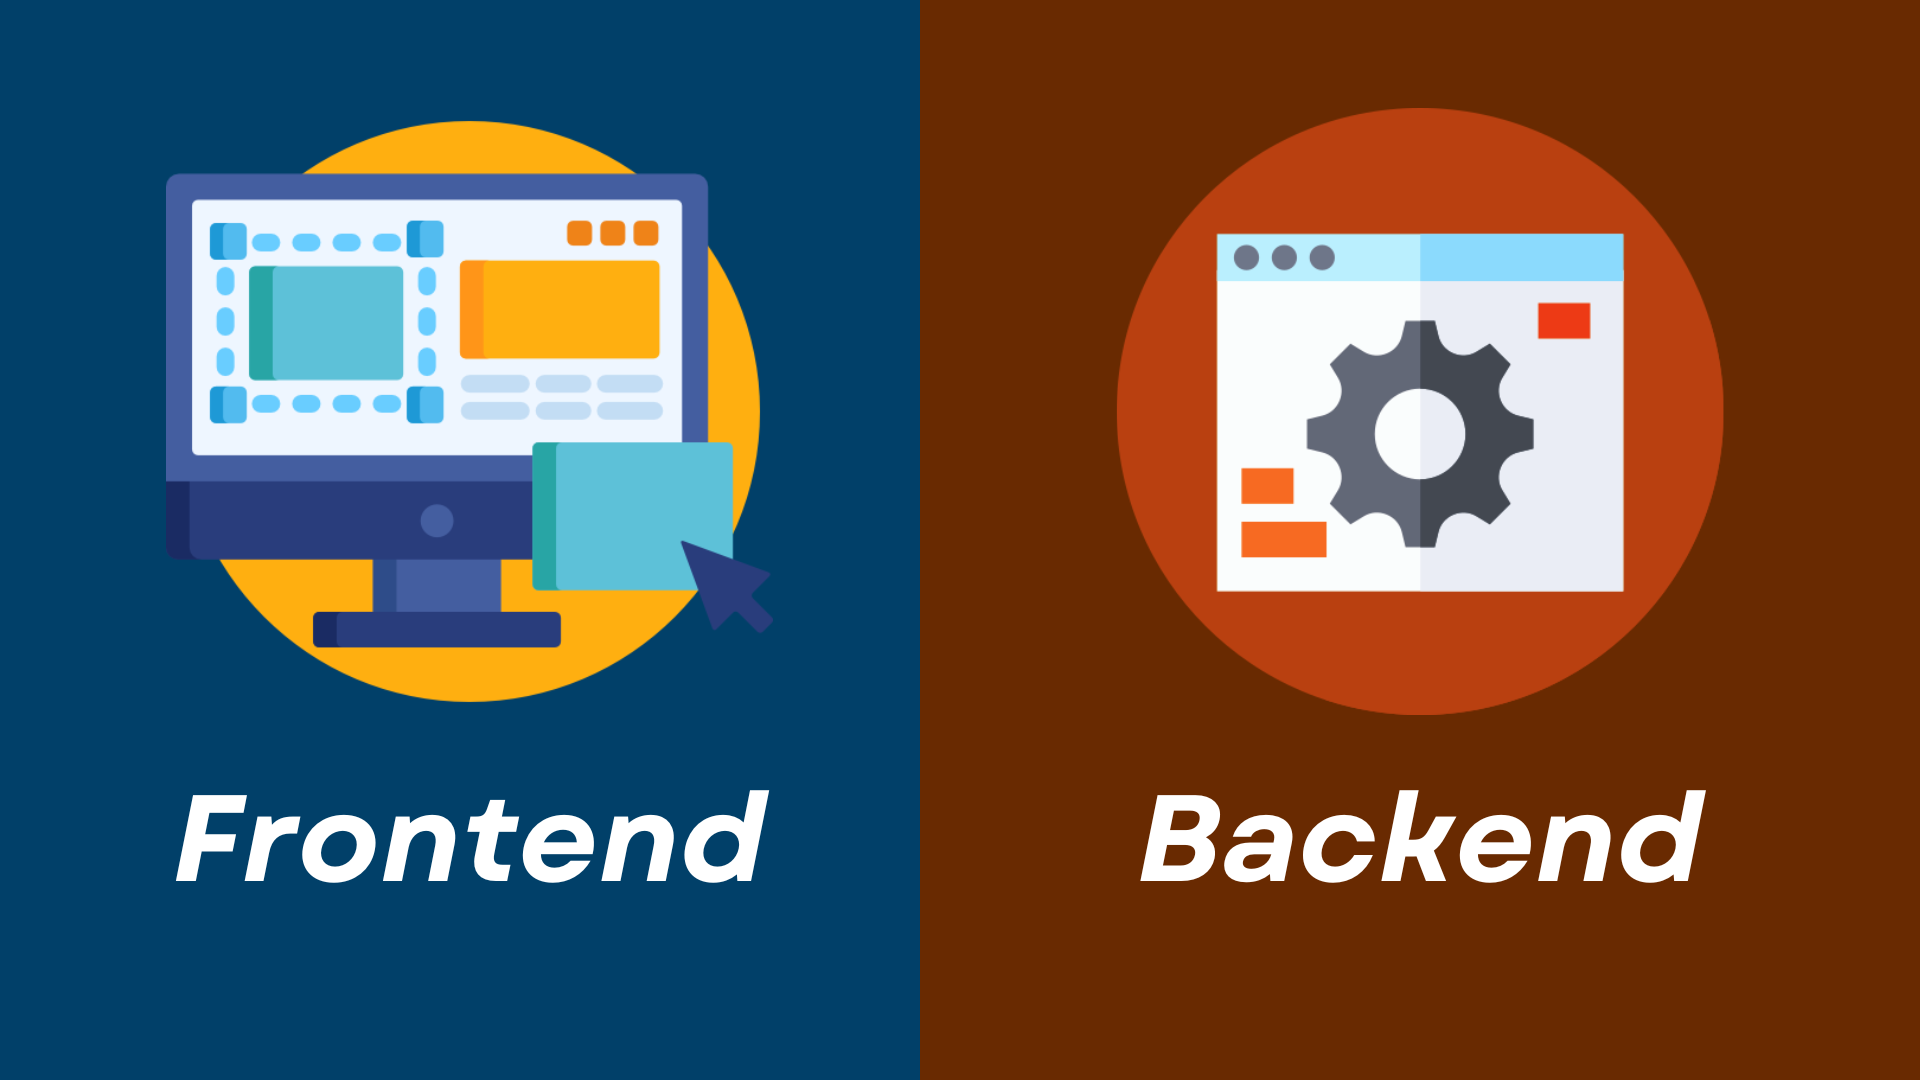 Differentiating Backend and Frontend